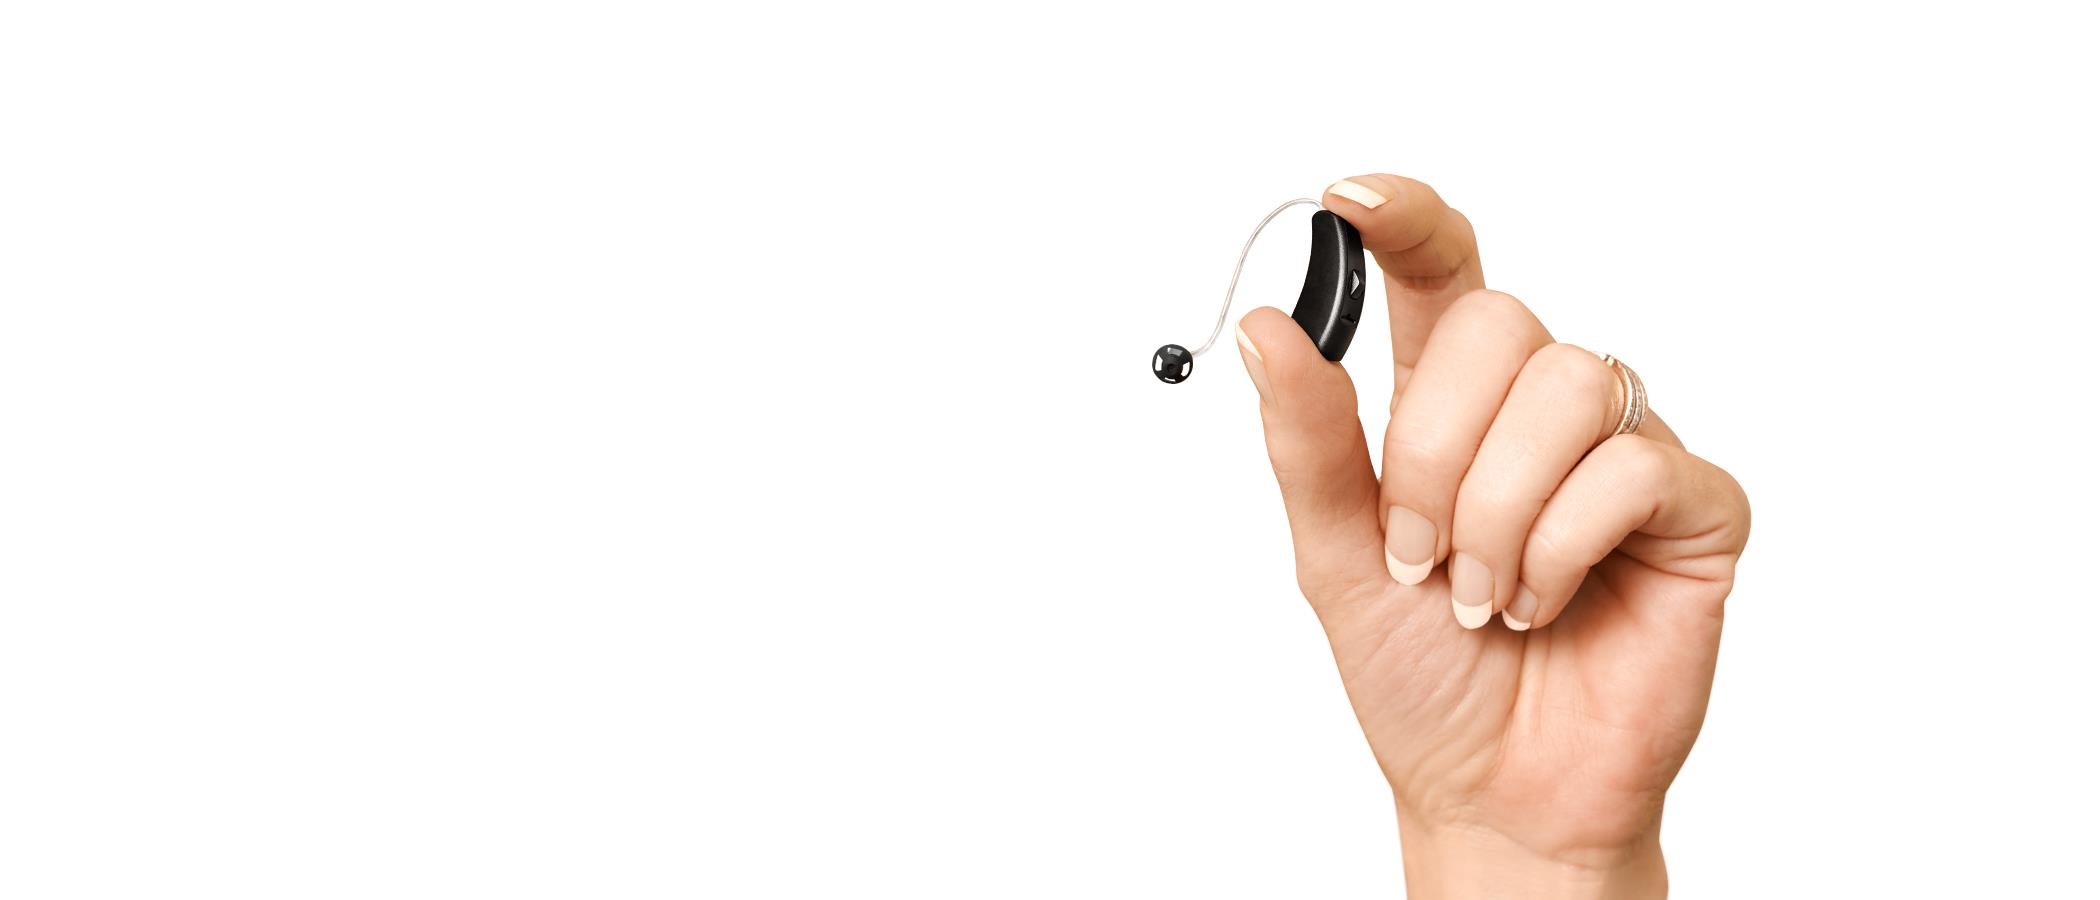 Hearing aid and hearing aid technology.